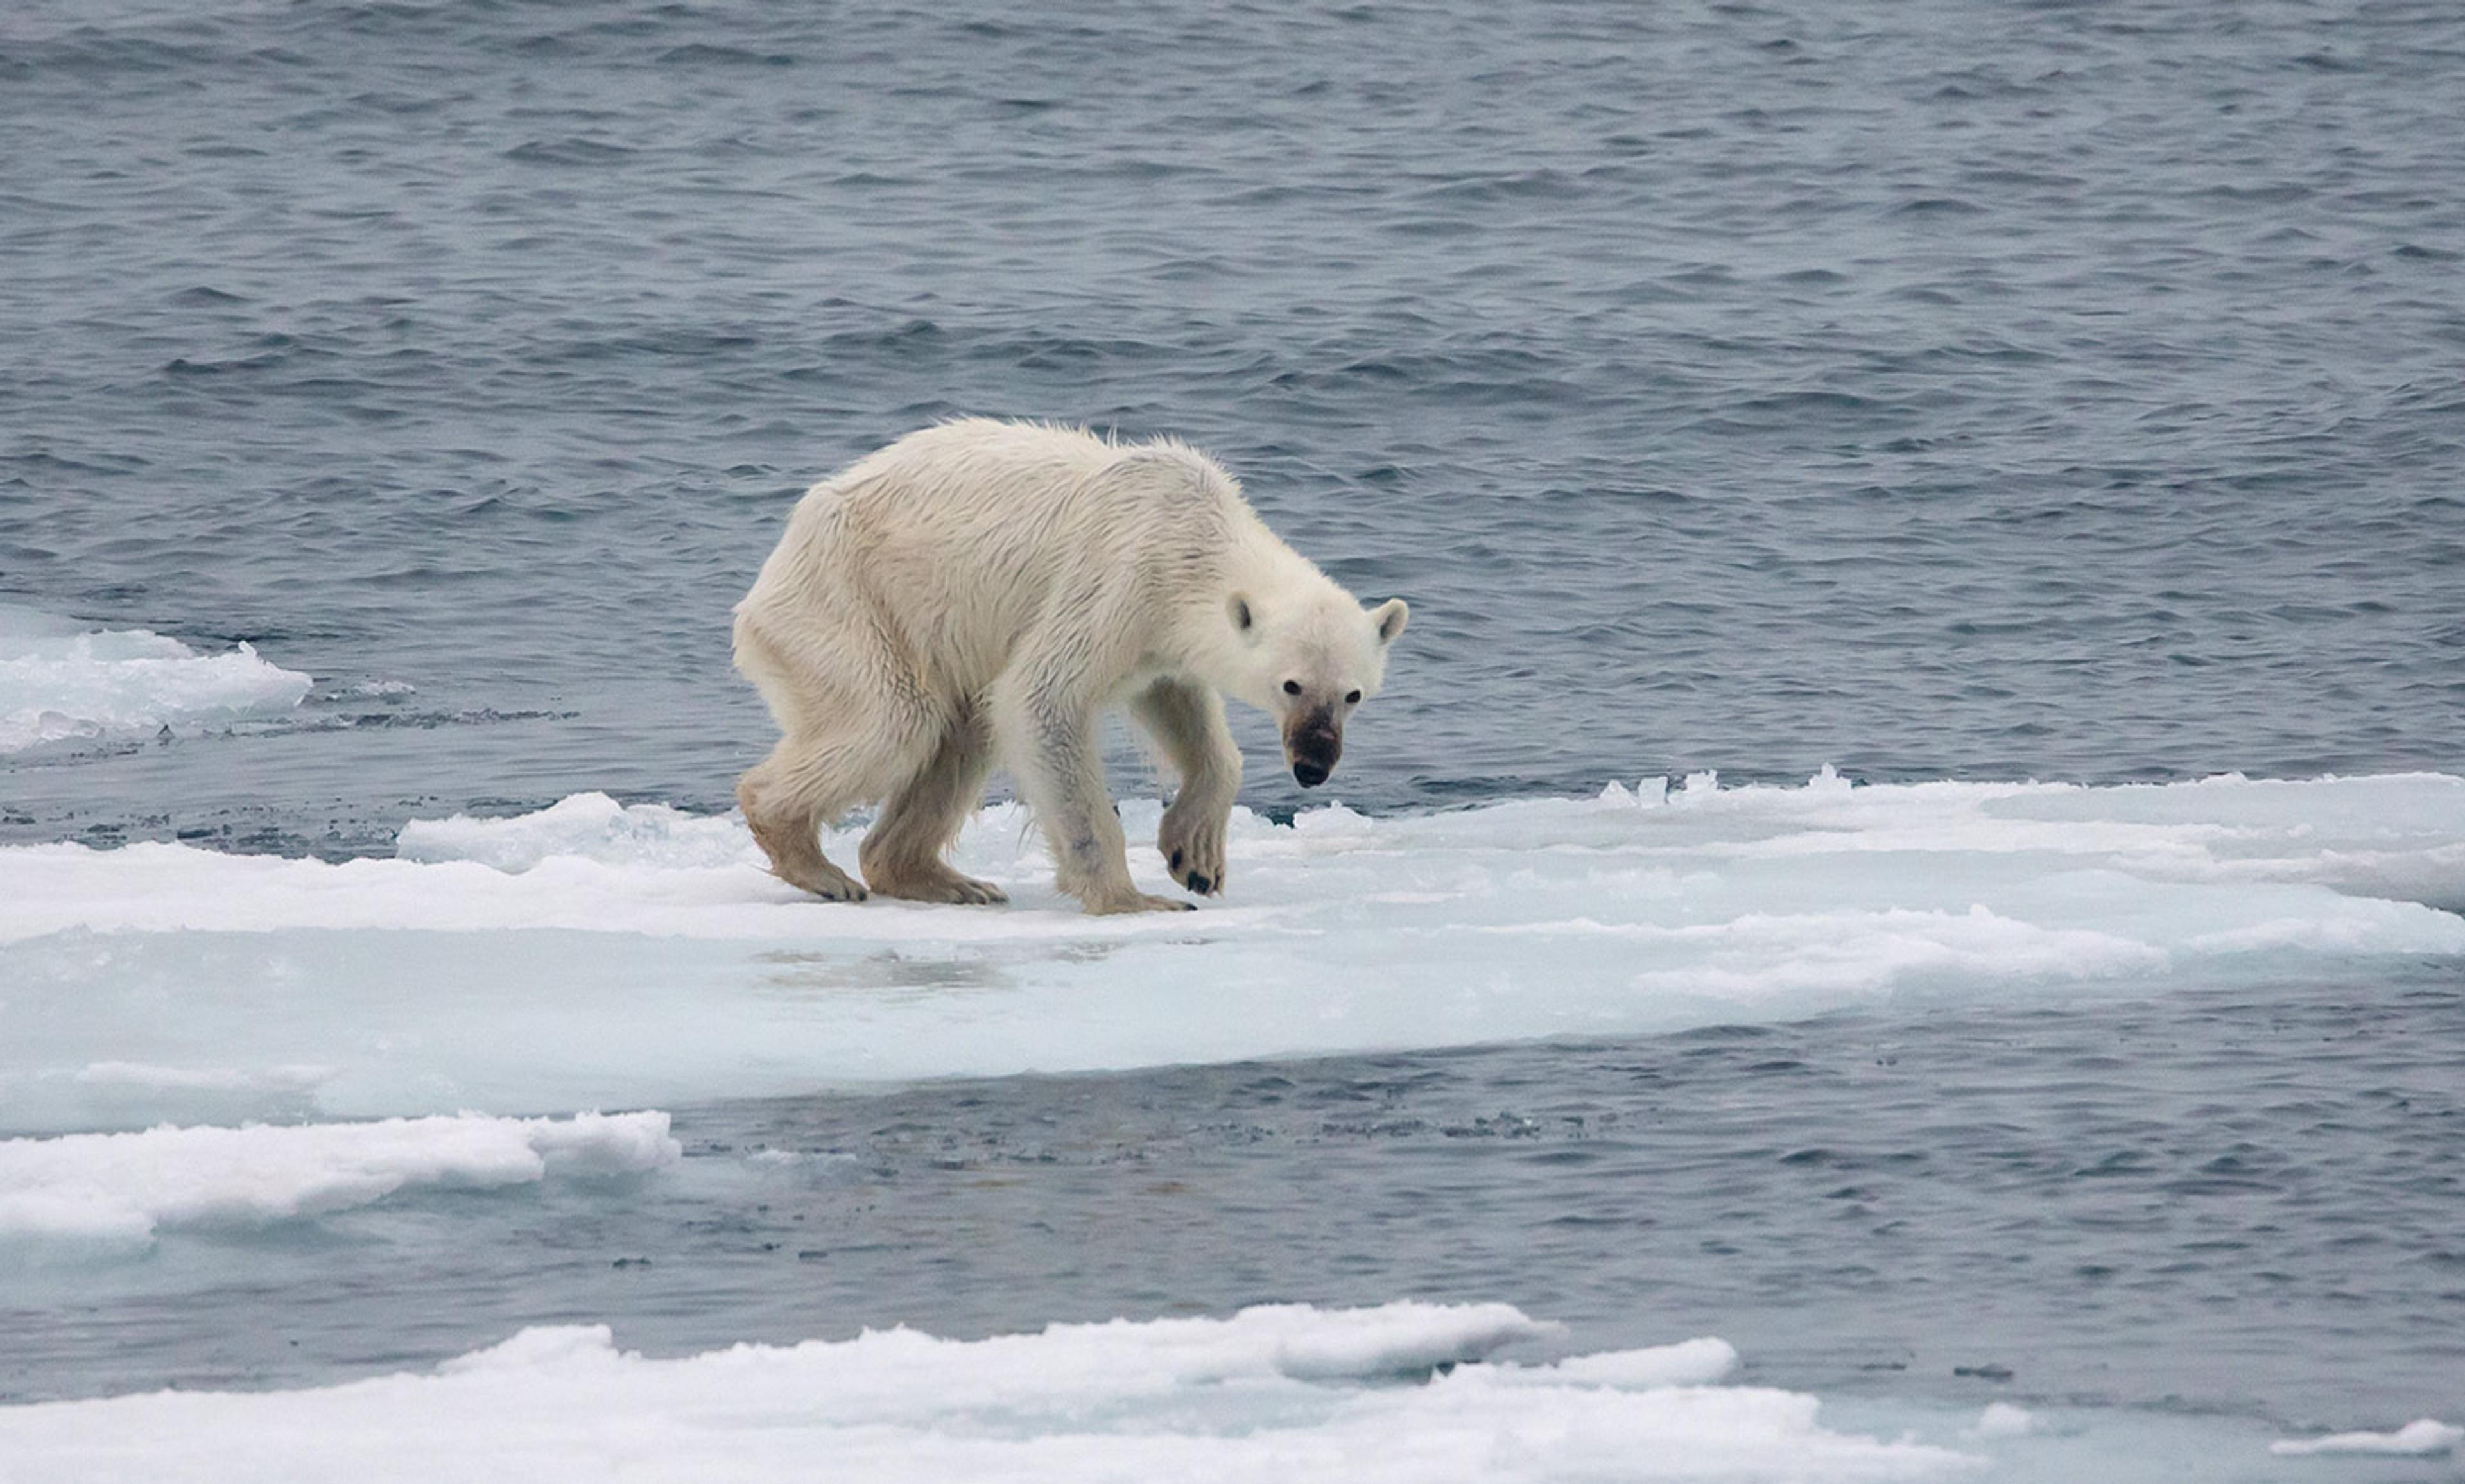 <p>A starving polar bear in the Arctic. <em>Photo by Andreas Weith/courtesy of Wikimedia Commons</em></p>